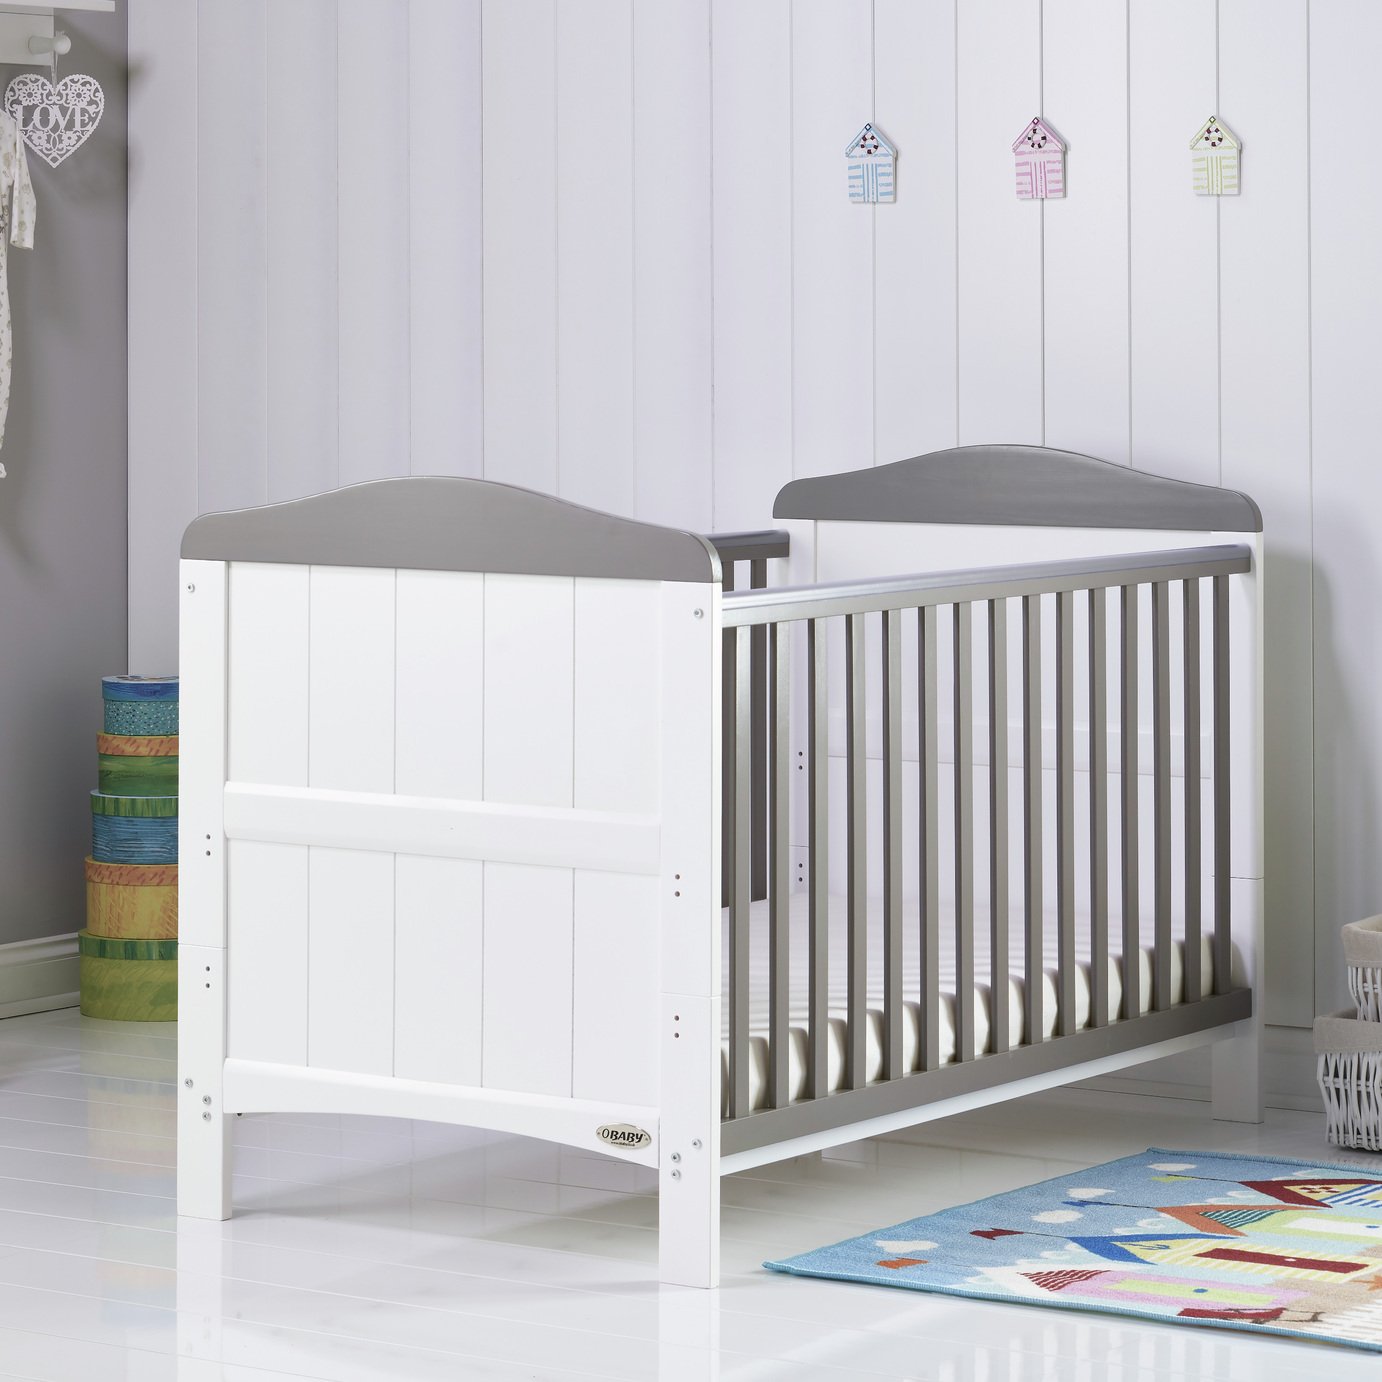 Obaby Whitby Cot Bed Review